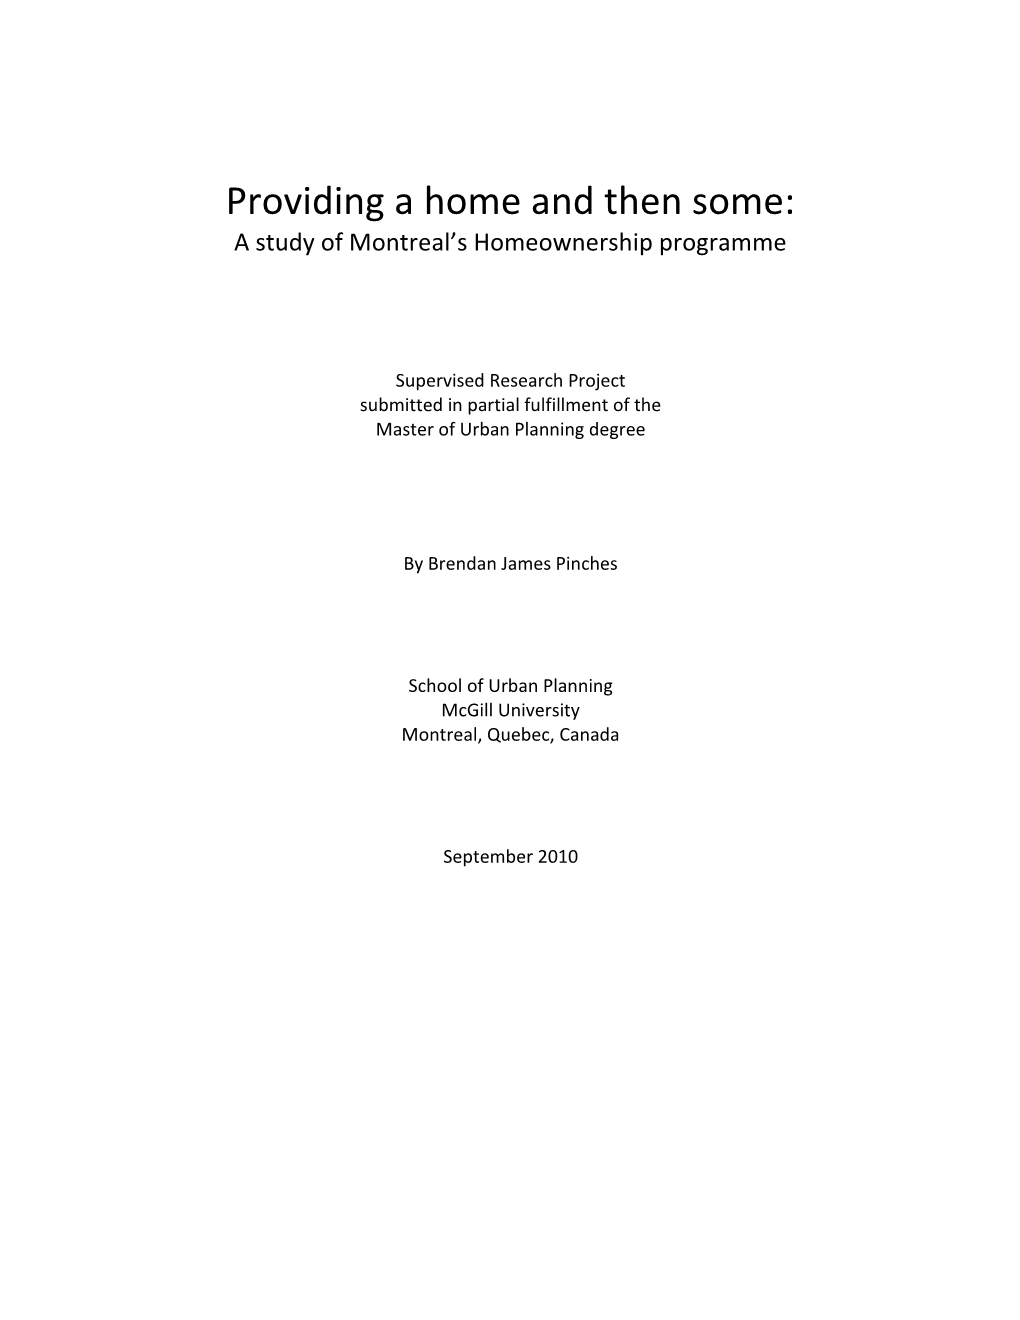 A Study of Montreal's Homeownership Programme